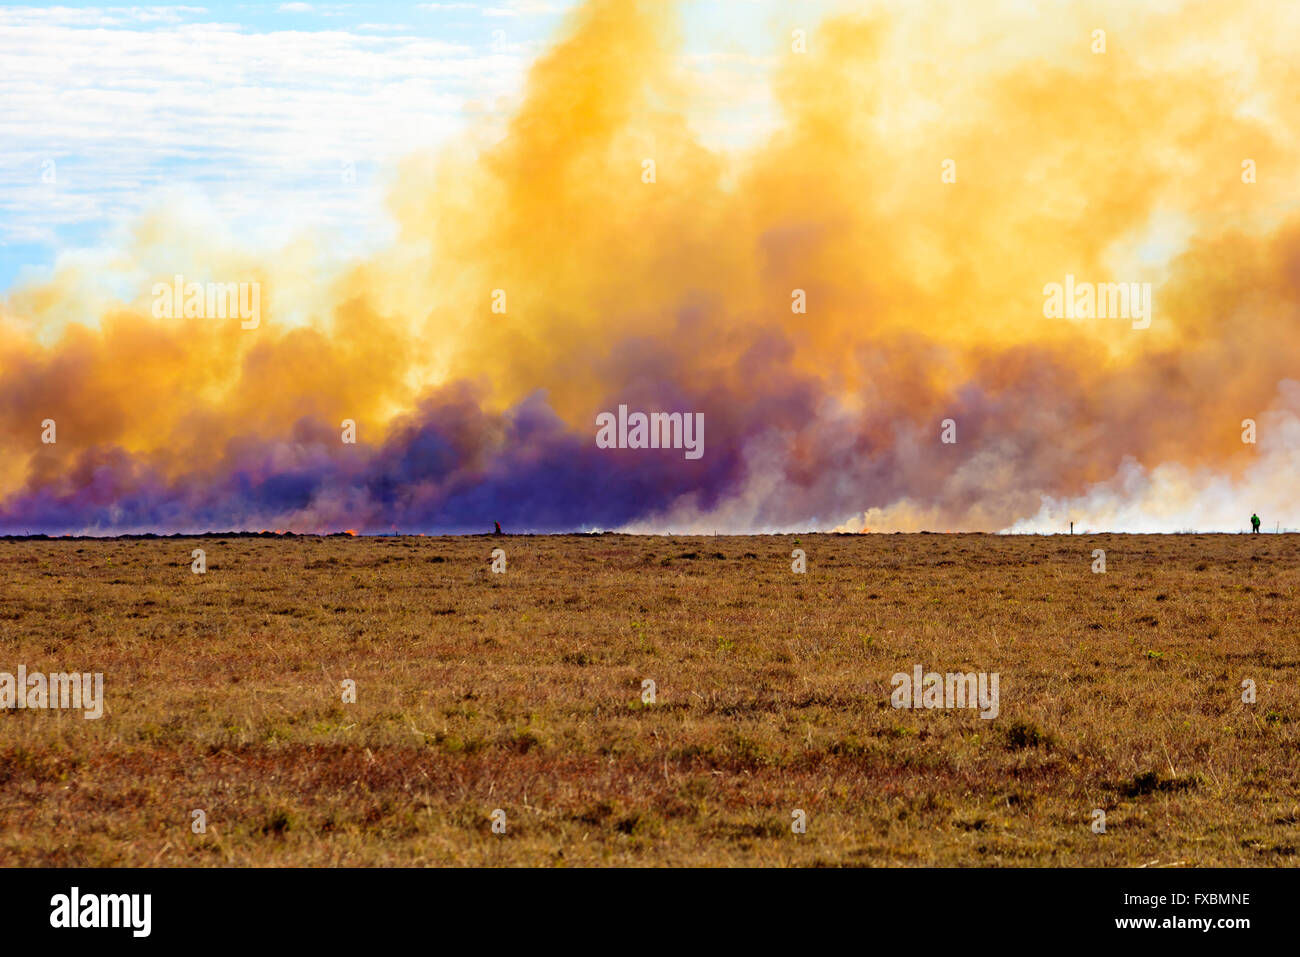 The deliberate and controlled burning of heather on a moor. The rising smoke is chokingly dense and yellow, mixed with white wat Stock Photo